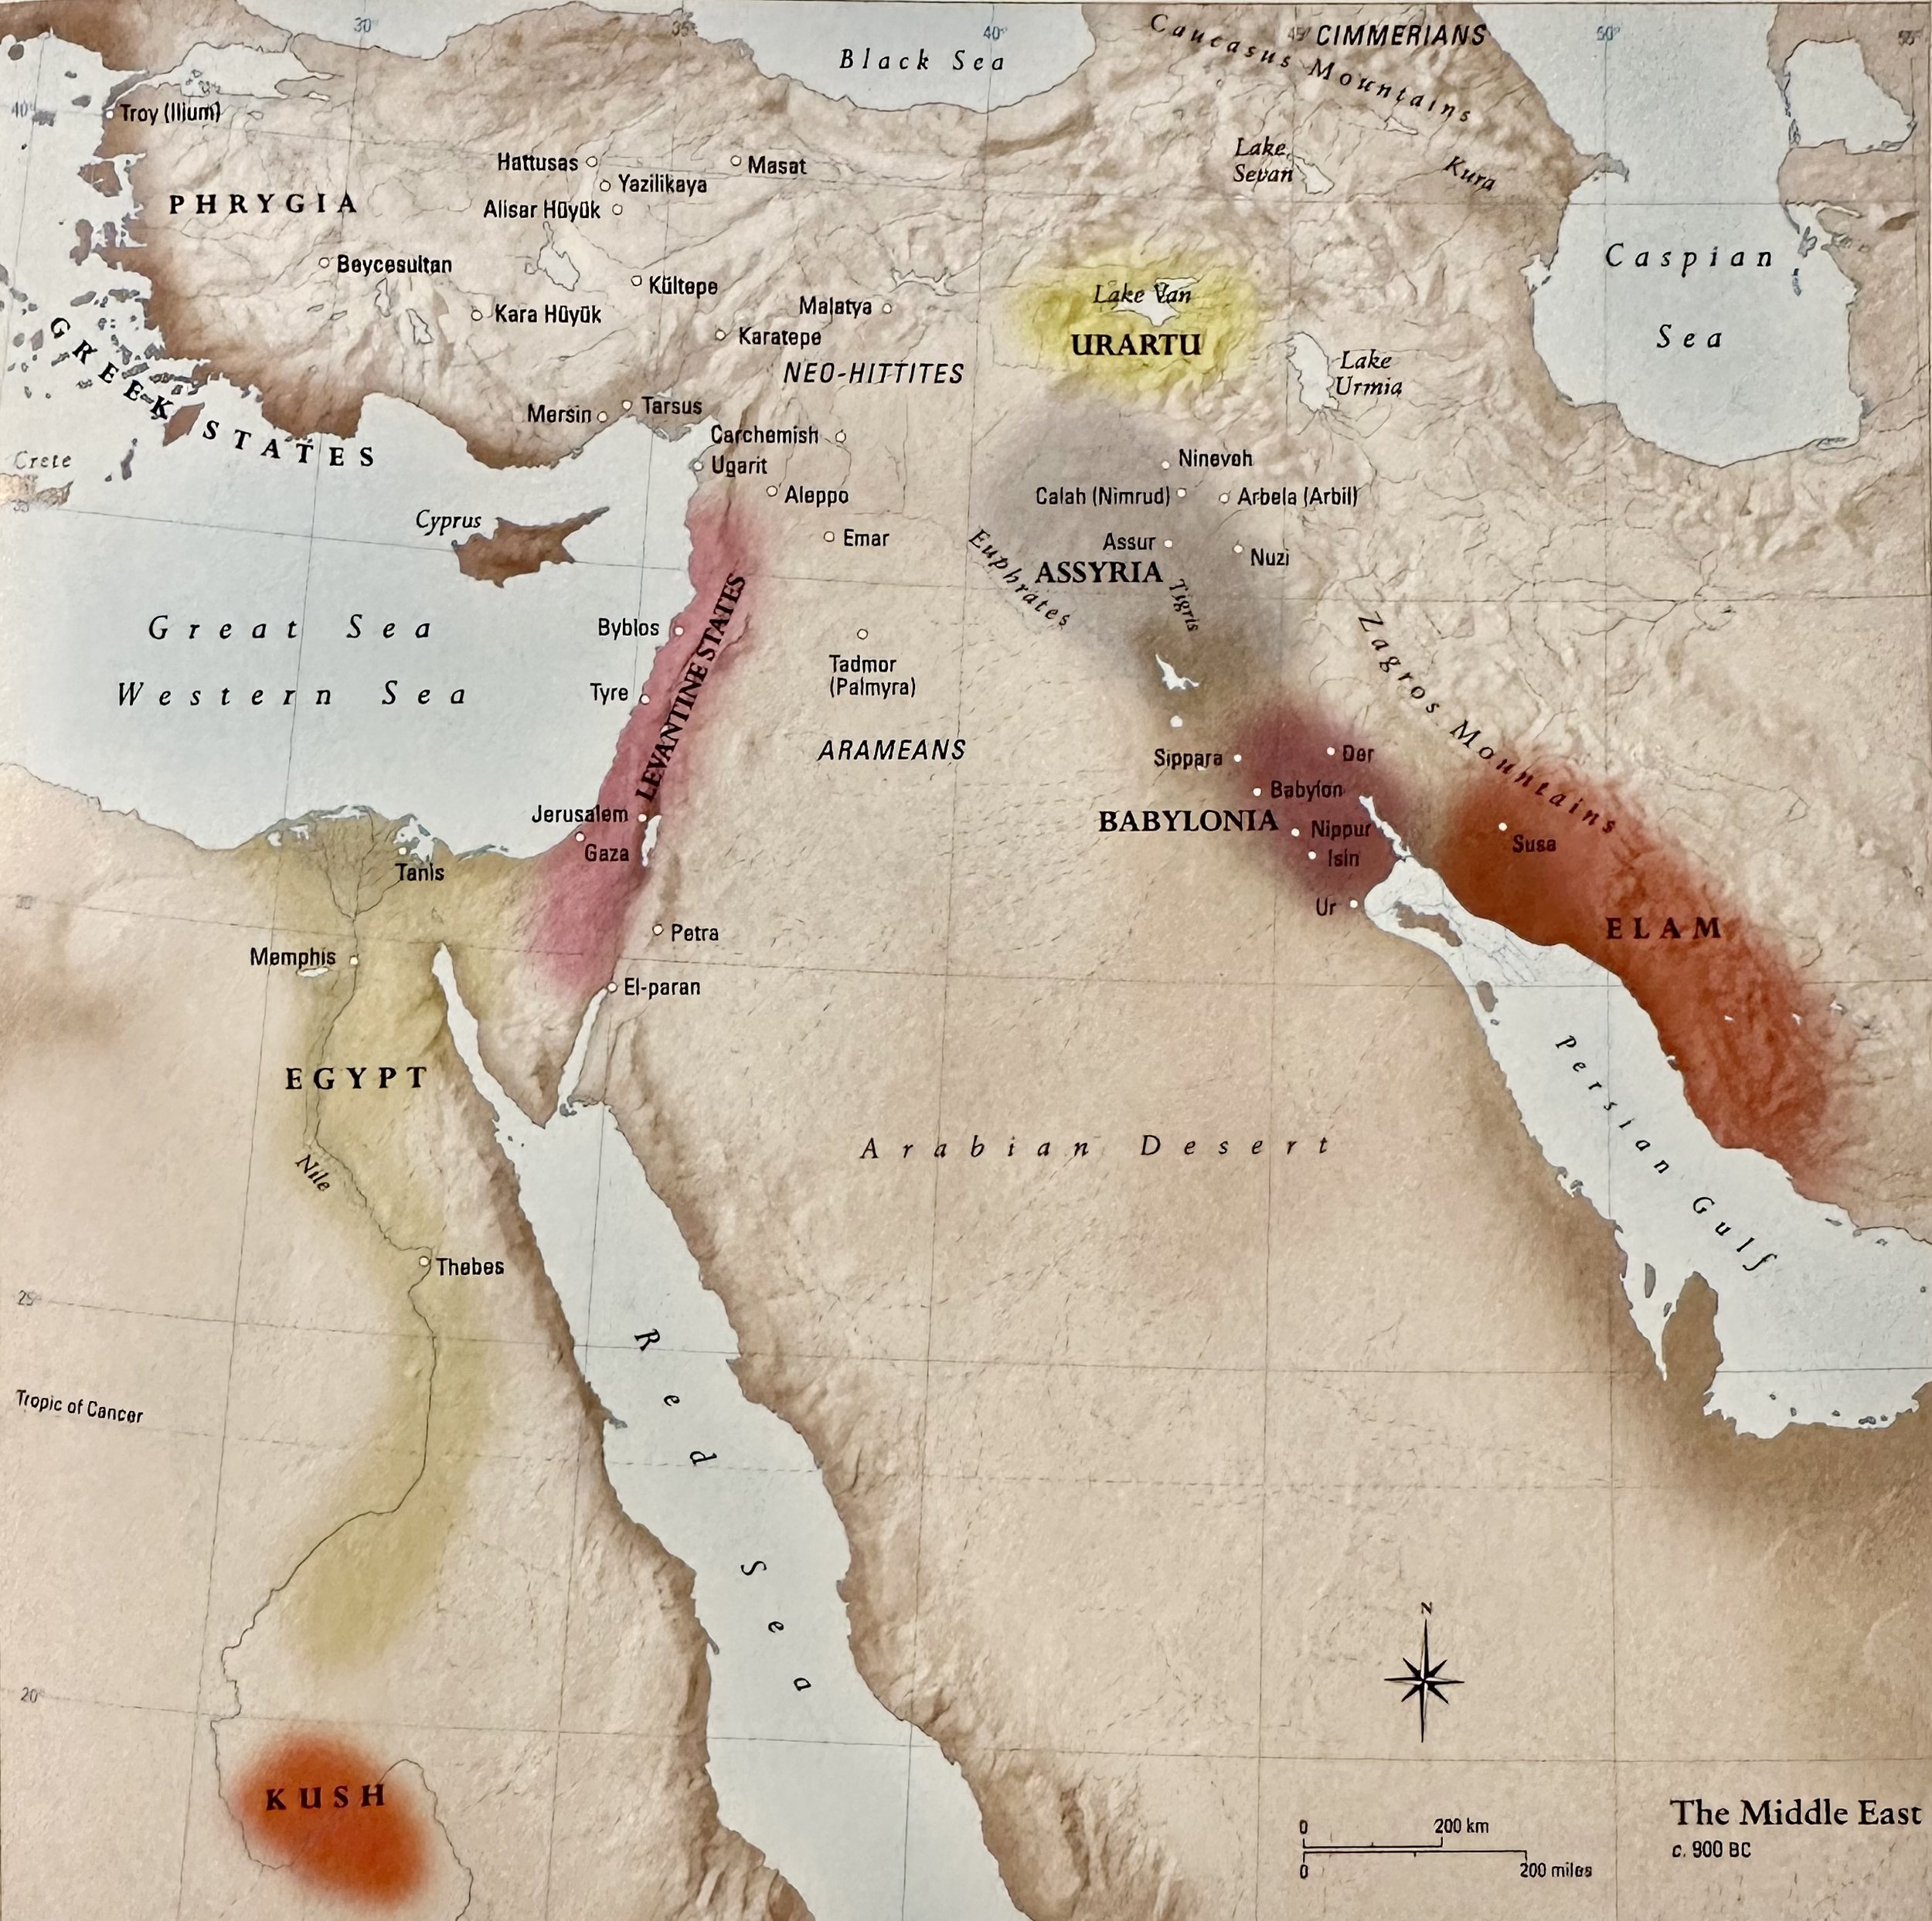 900 BCE The Middle East Atlas of the Bible.jpeg